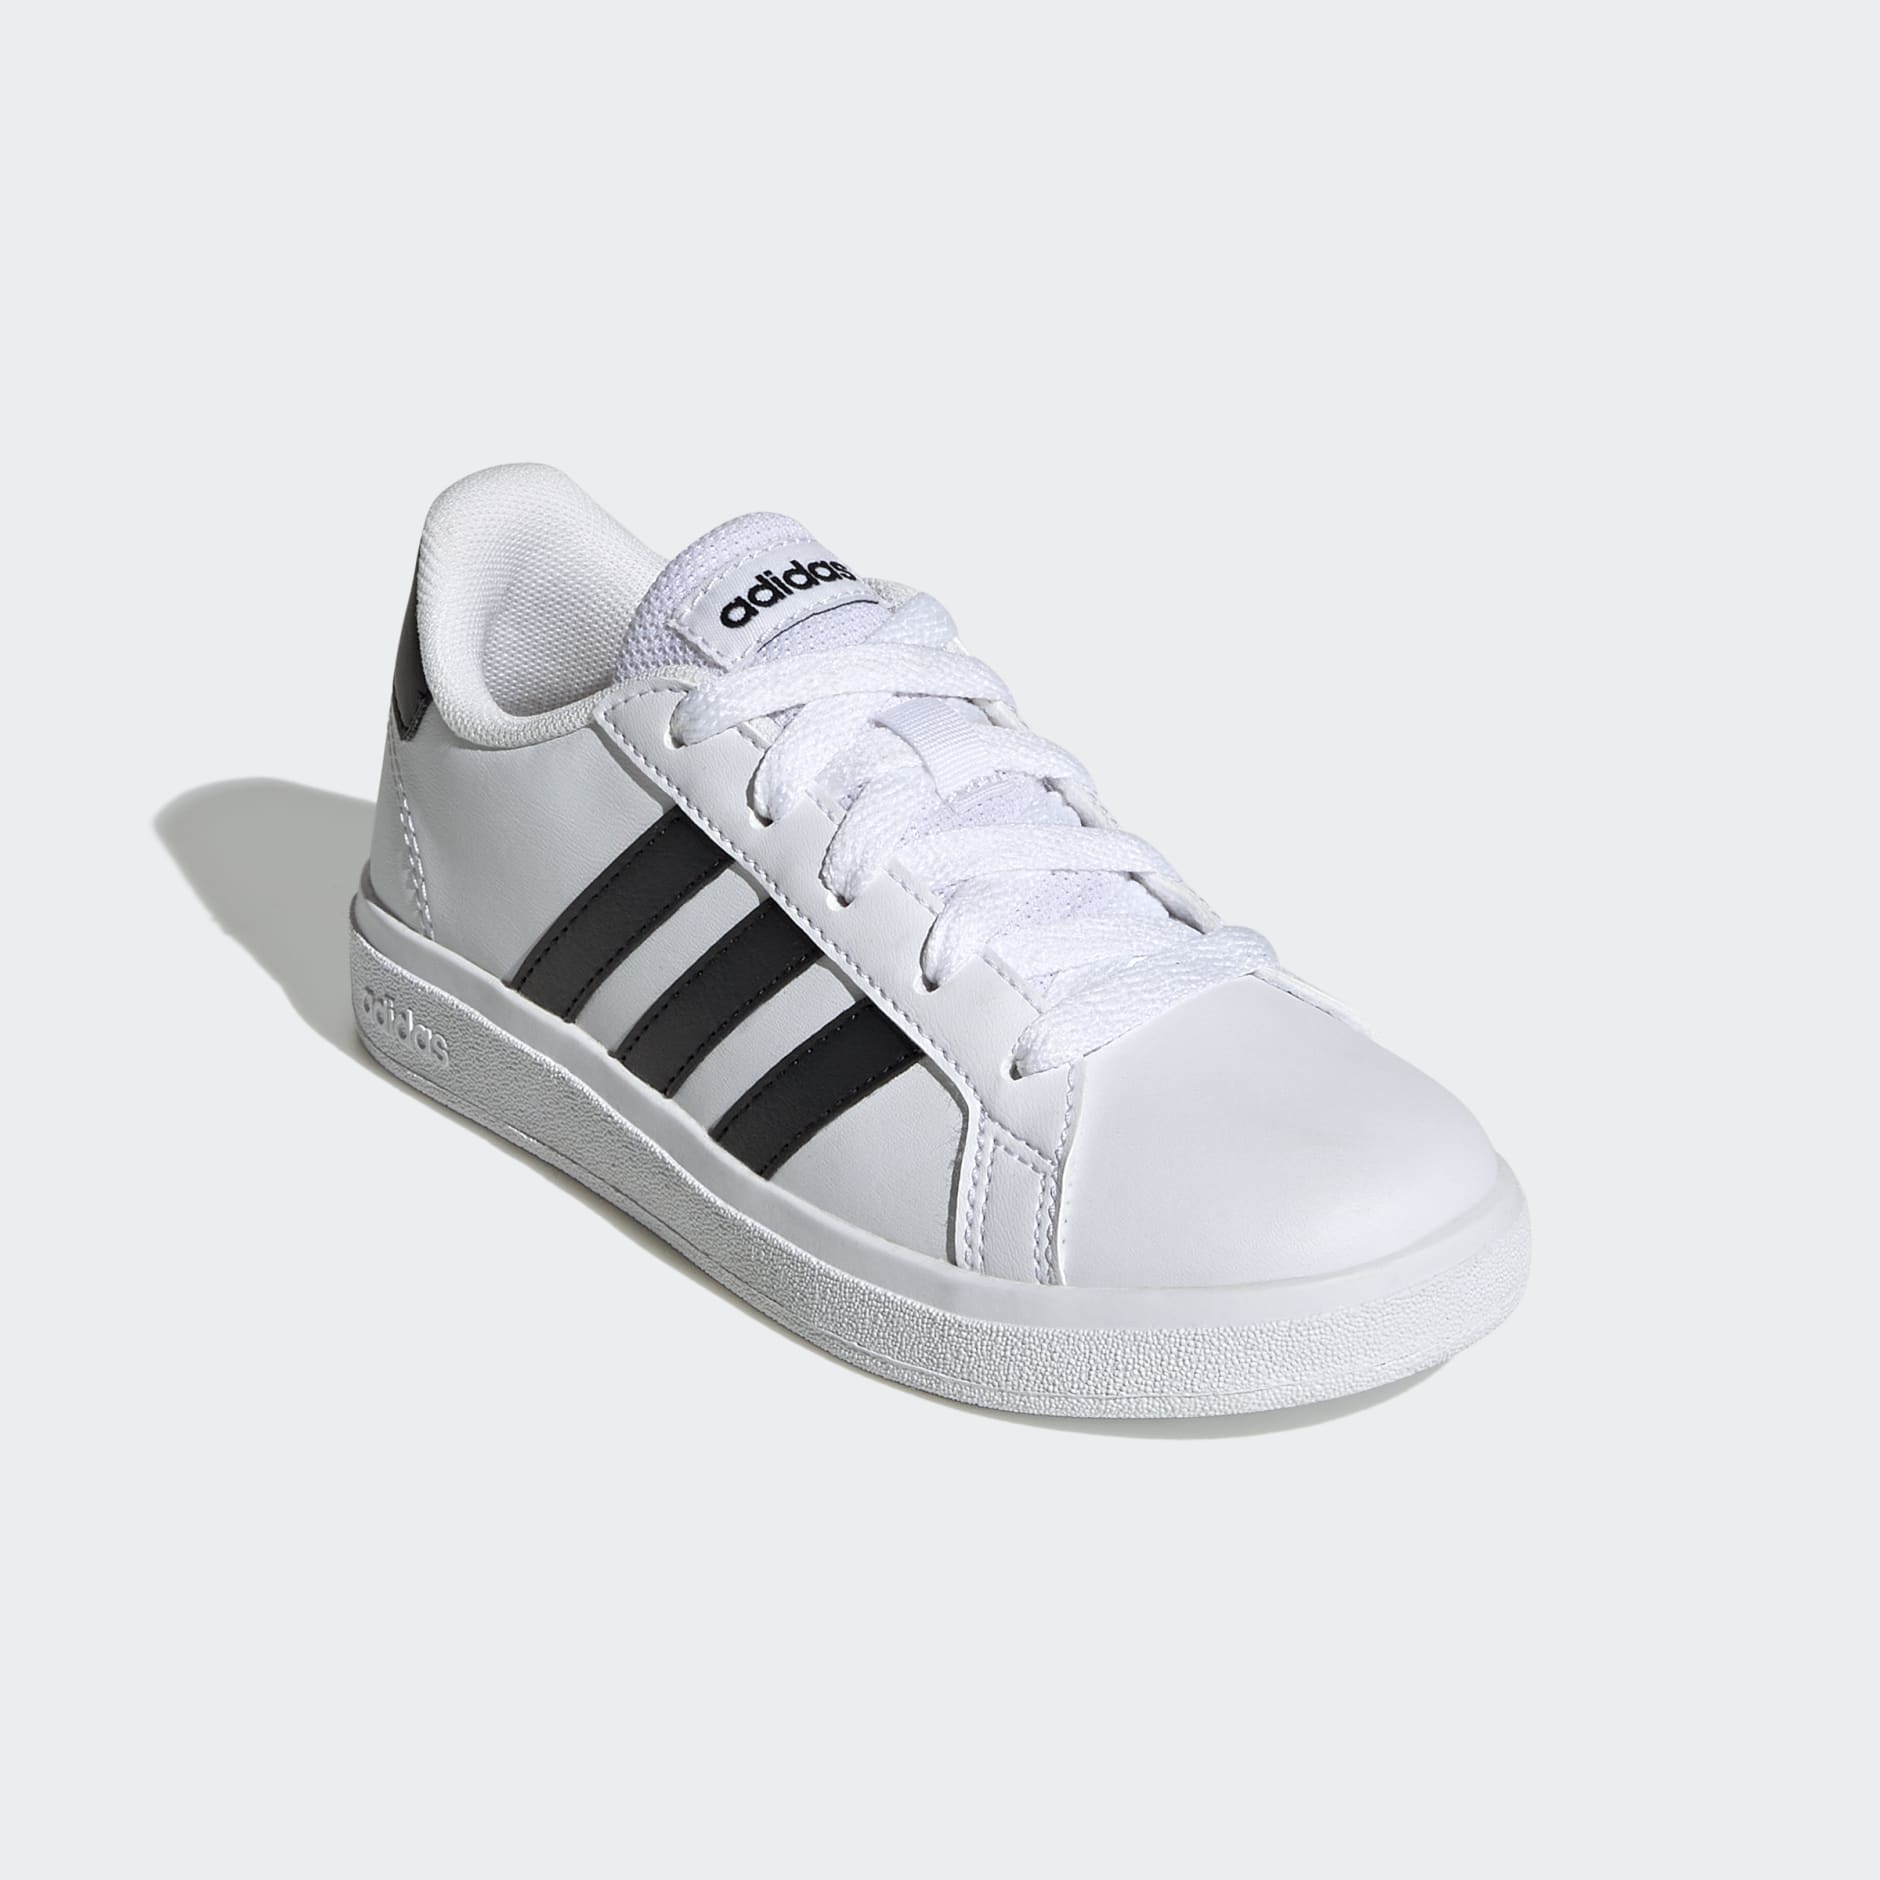 Kids Shoes - Grand Court Lifestyle Tennis Lace-Up Shoes - White ...